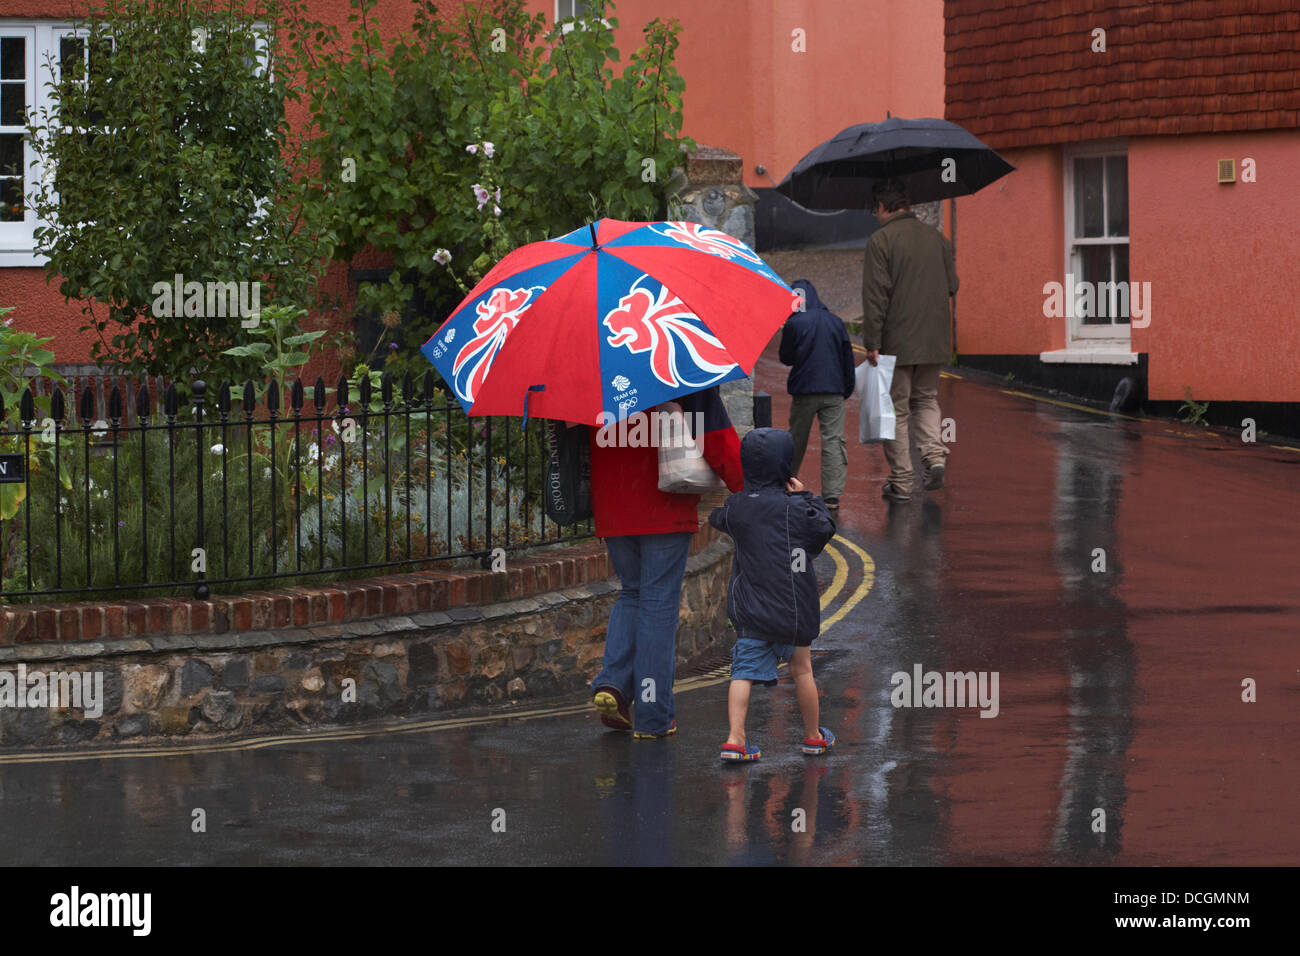 Lyme Regis, UK 17 August 2013. Tourists brave the wet weather.  Family walk along the streets under umbrellas trying to keep dry under the shelter. Credit:  Carolyn Jenkins/Alamy Live News Stock Photo